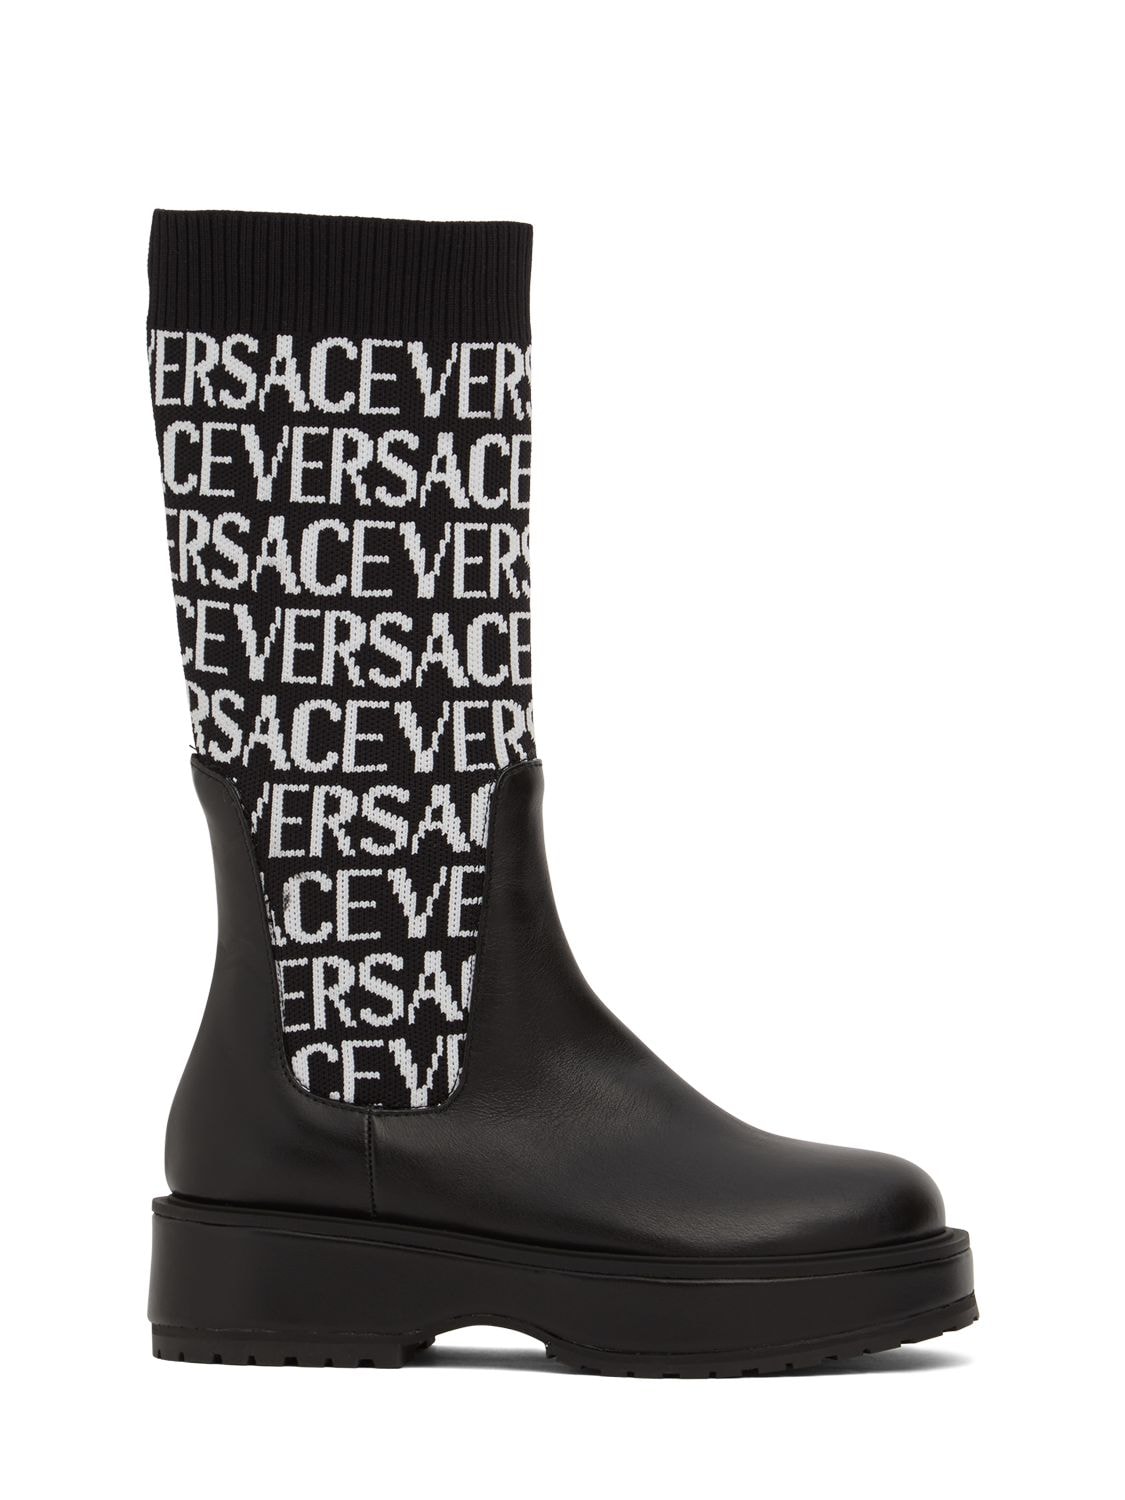 VERSACE LOGO JACQUARD KNIT & LEATHER TALL BOOTS